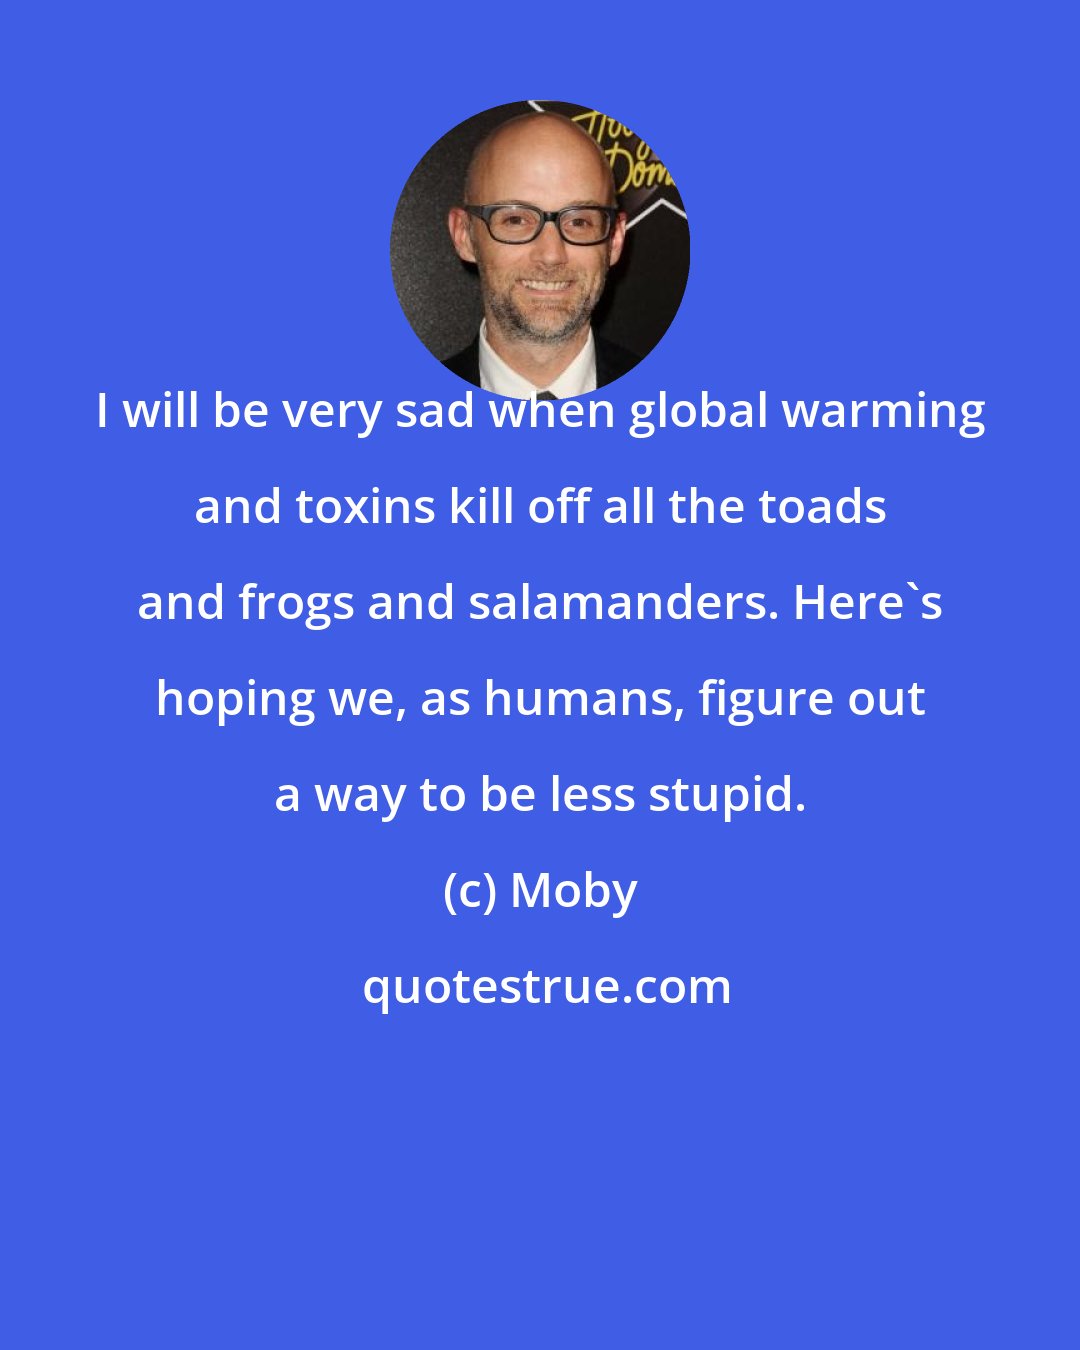 Moby: I will be very sad when global warming and toxins kill off all the toads and frogs and salamanders. Here's hoping we, as humans, figure out a way to be less stupid.